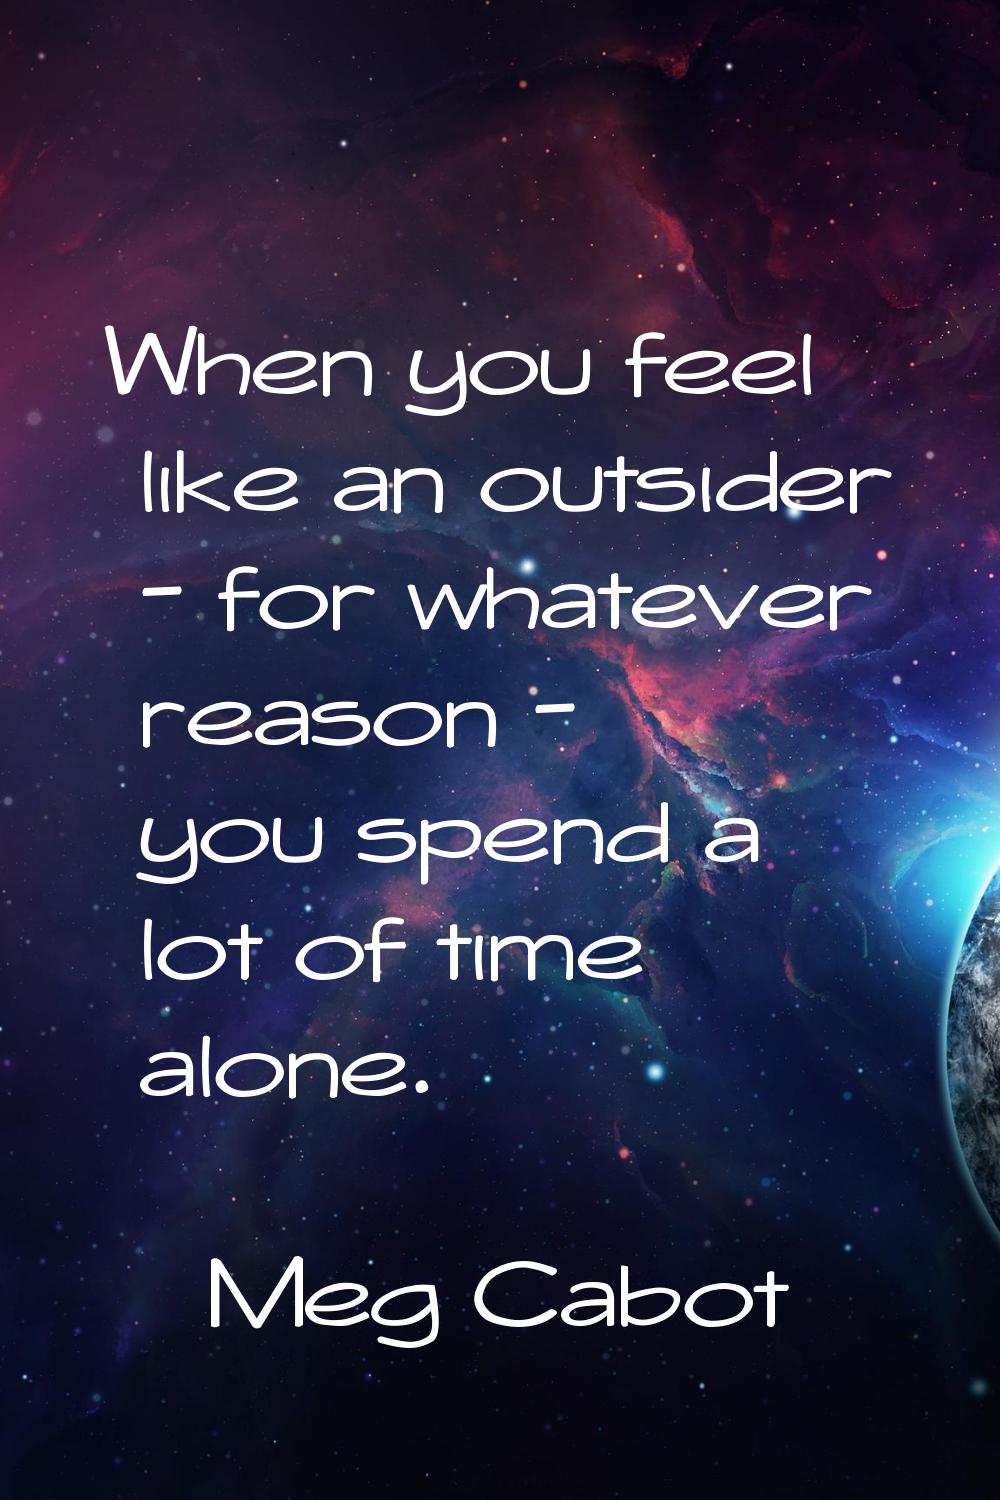 When you feel like an outsider - for whatever reason - you spend a lot of time alone.